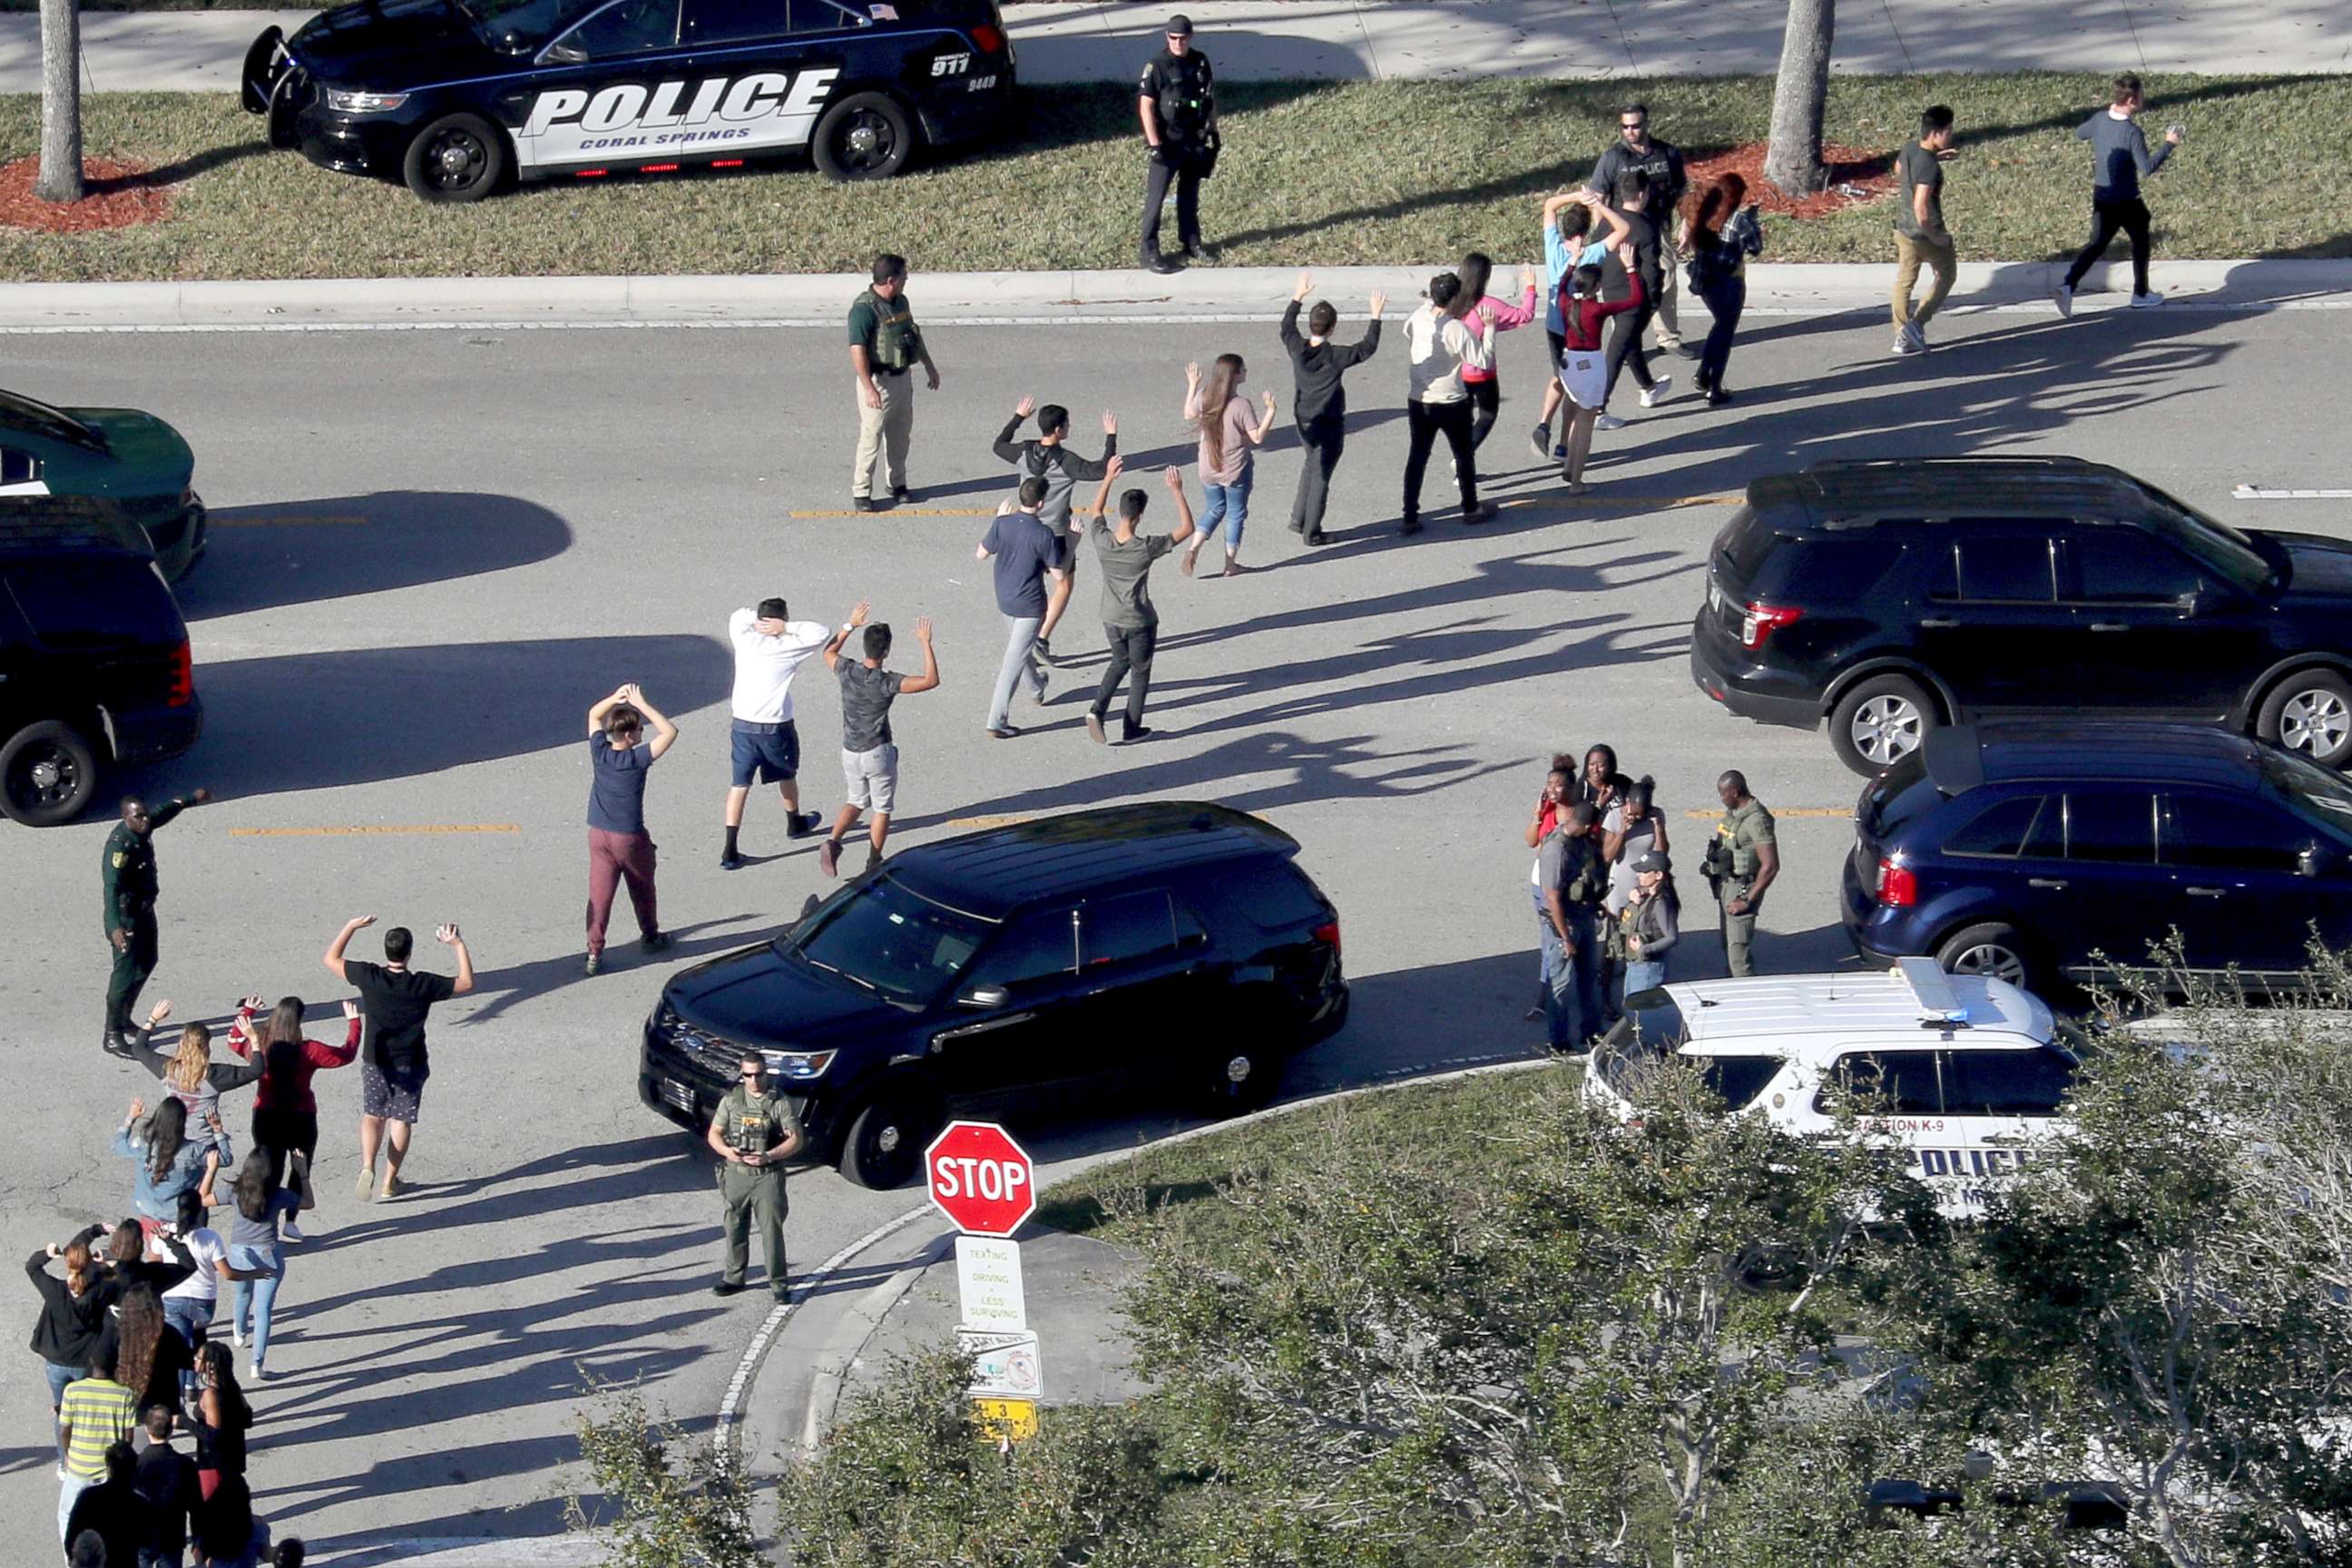 PHOTO: Students hold their hands in the air as they are evacuated by police from Marjory Stoneman Douglas High School in Parkland, Fla., after a shooter opened fire on the campus, Feb 14, 2018.